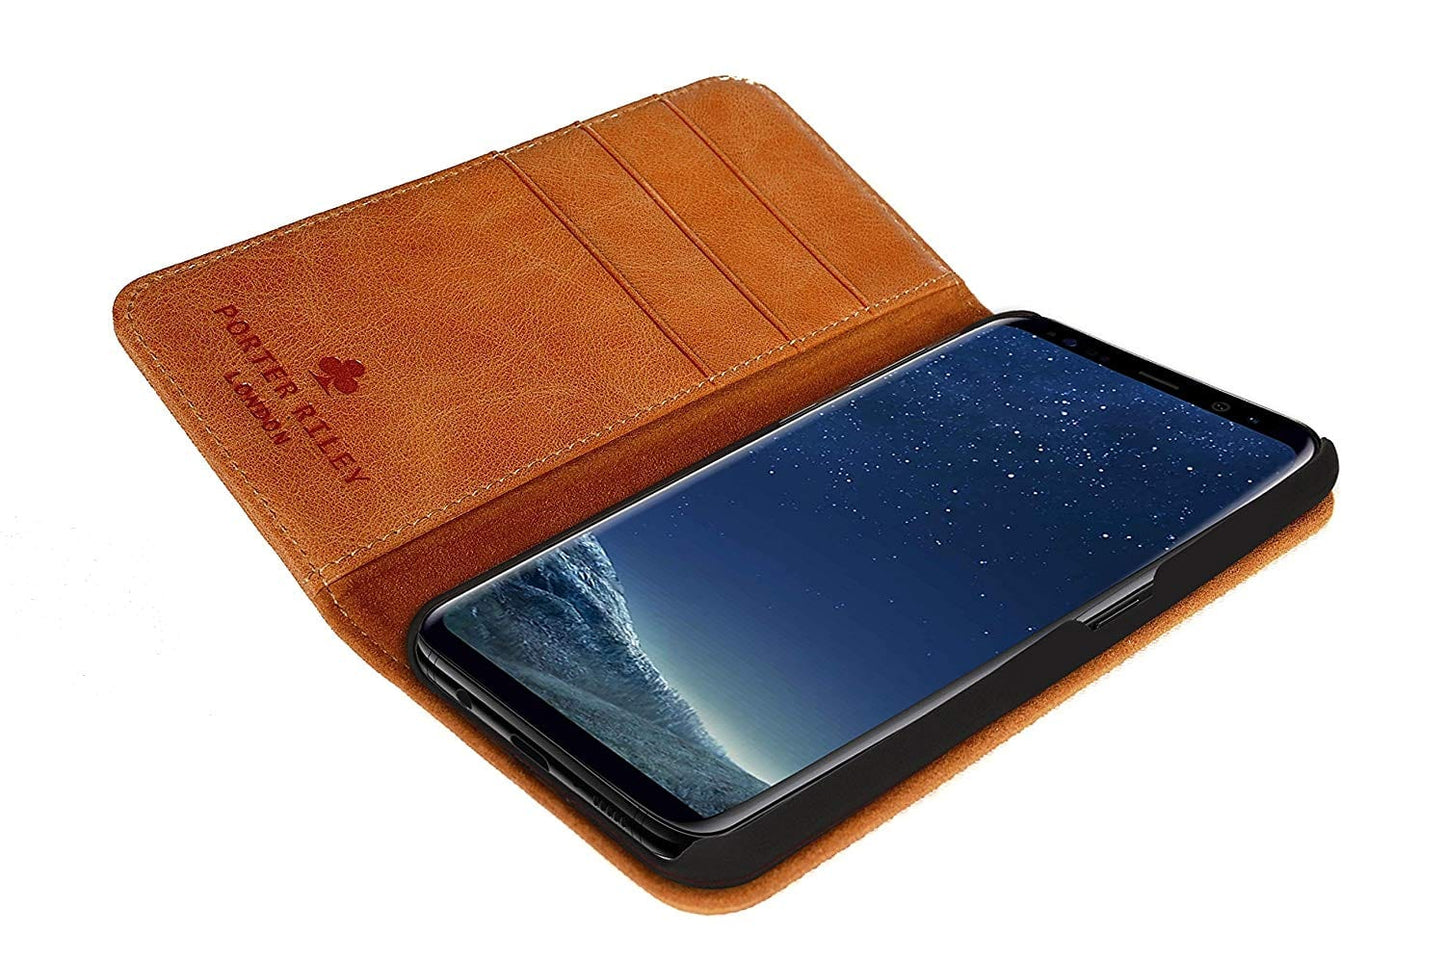 Samsung Galaxy S7 Leather Case. Premium Slim Genuine Leather Stand Case/Cover/Wallet (Tan)